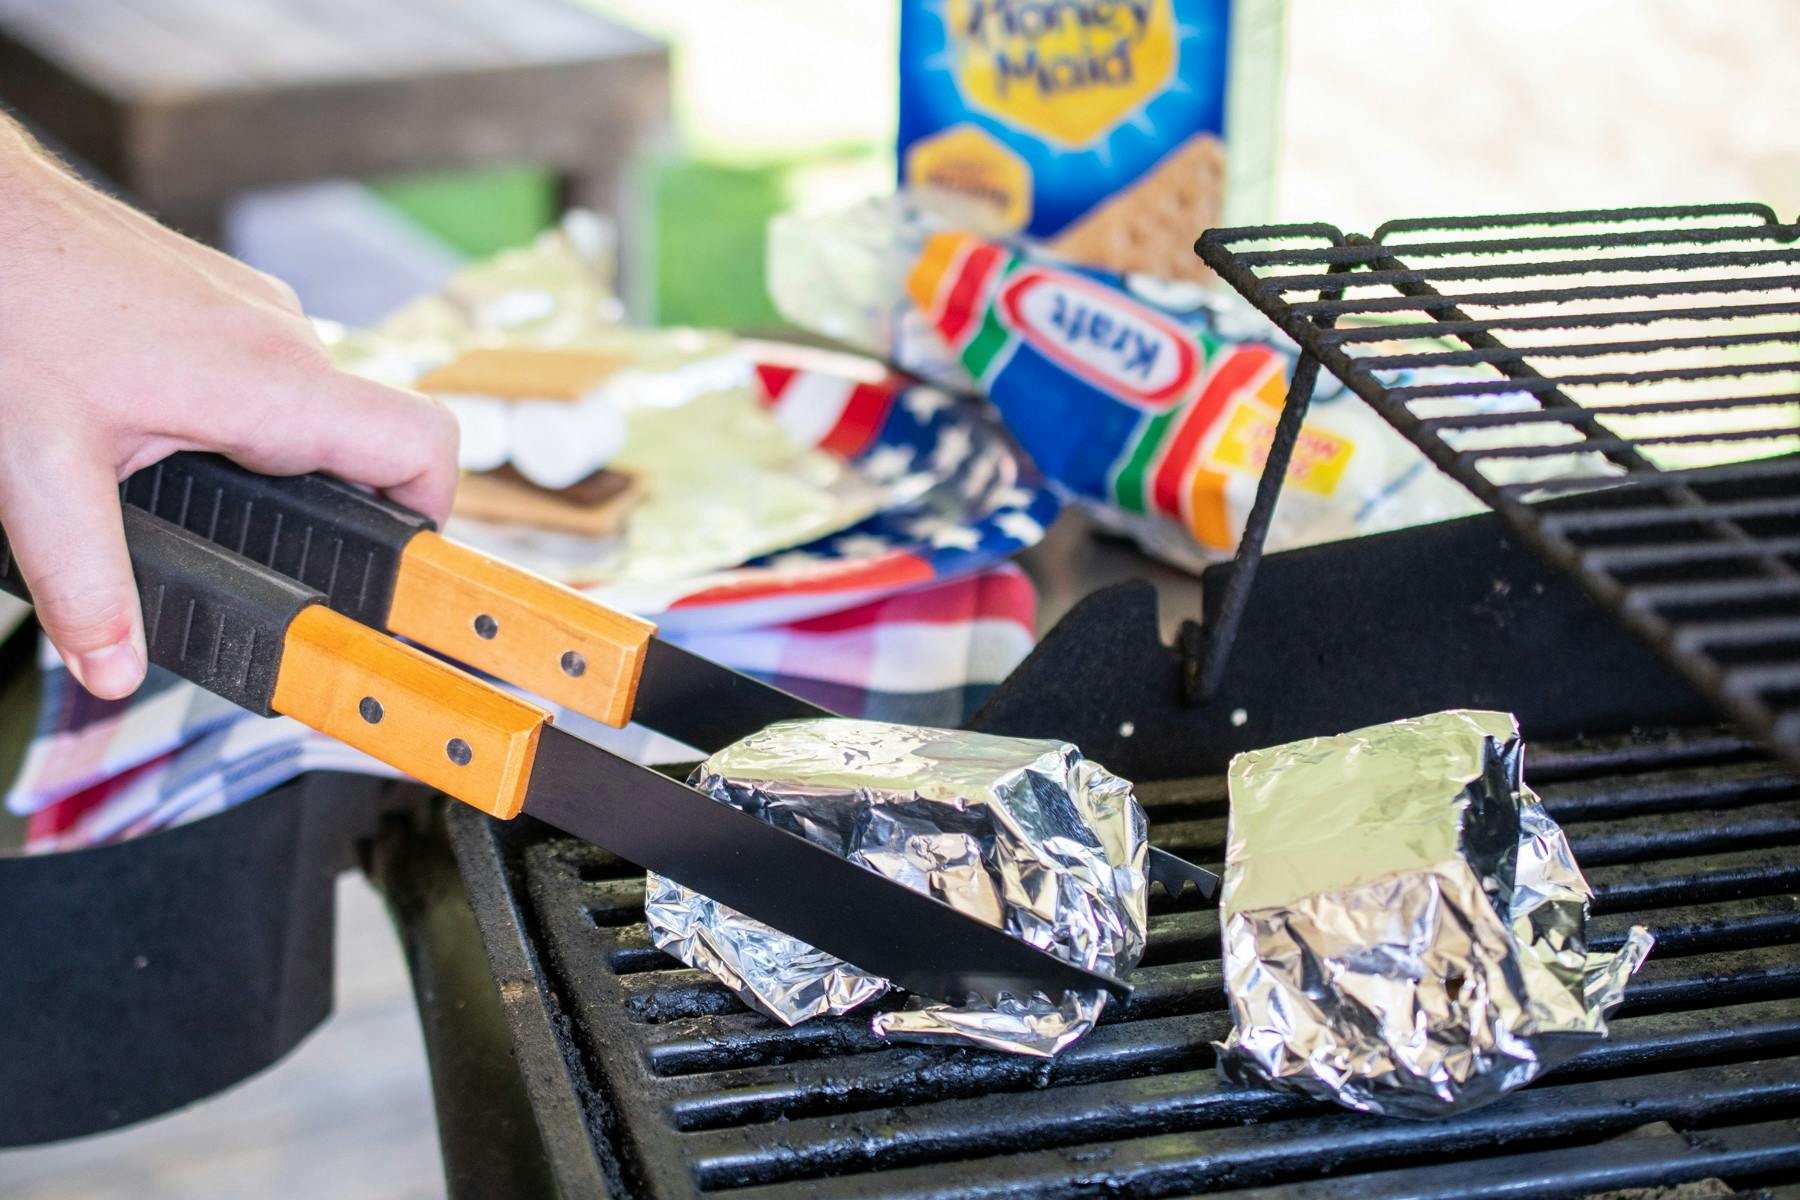 A person's hand using tongs to pick up a foil-wrapped s'more from a grill next to another foil-wrapped s'more, with s'more ingredients in the background.